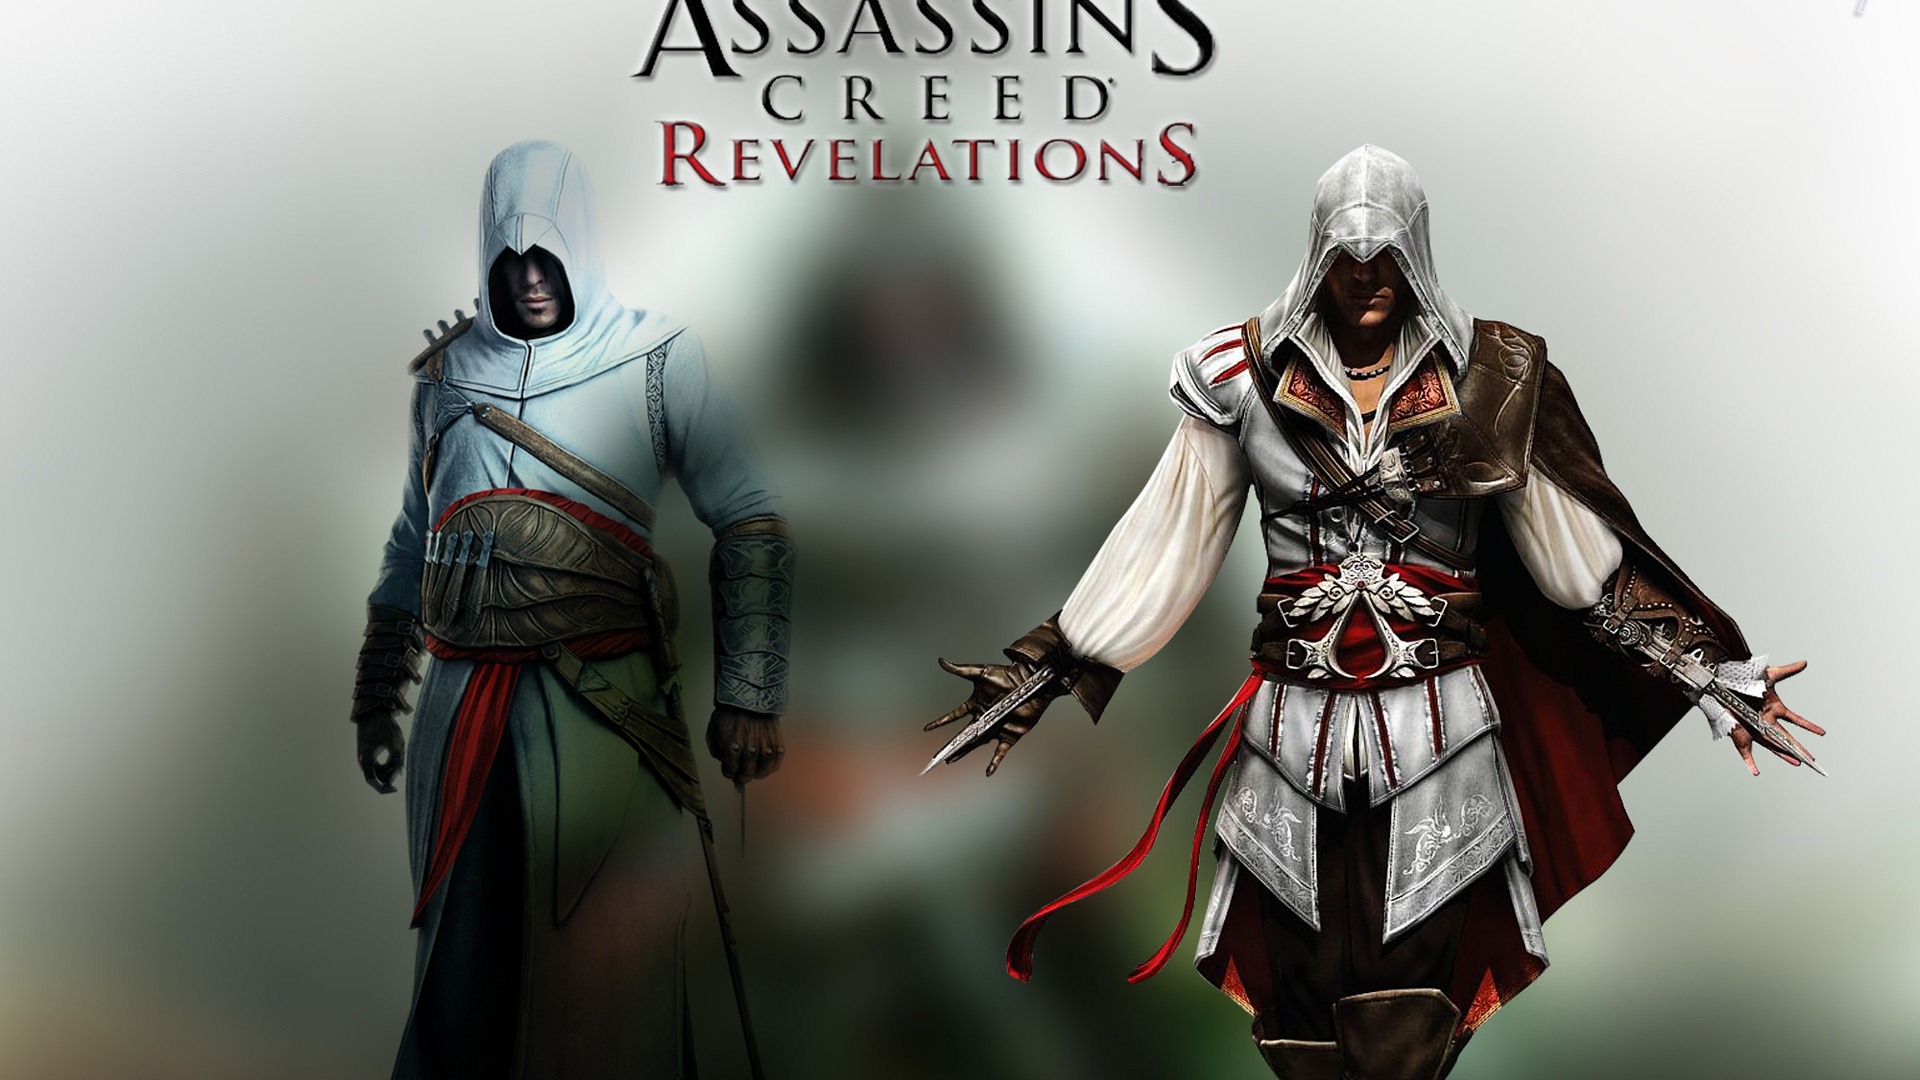 Assassin's Creed: Revelations HD wallpapers #26 - 1920x1080